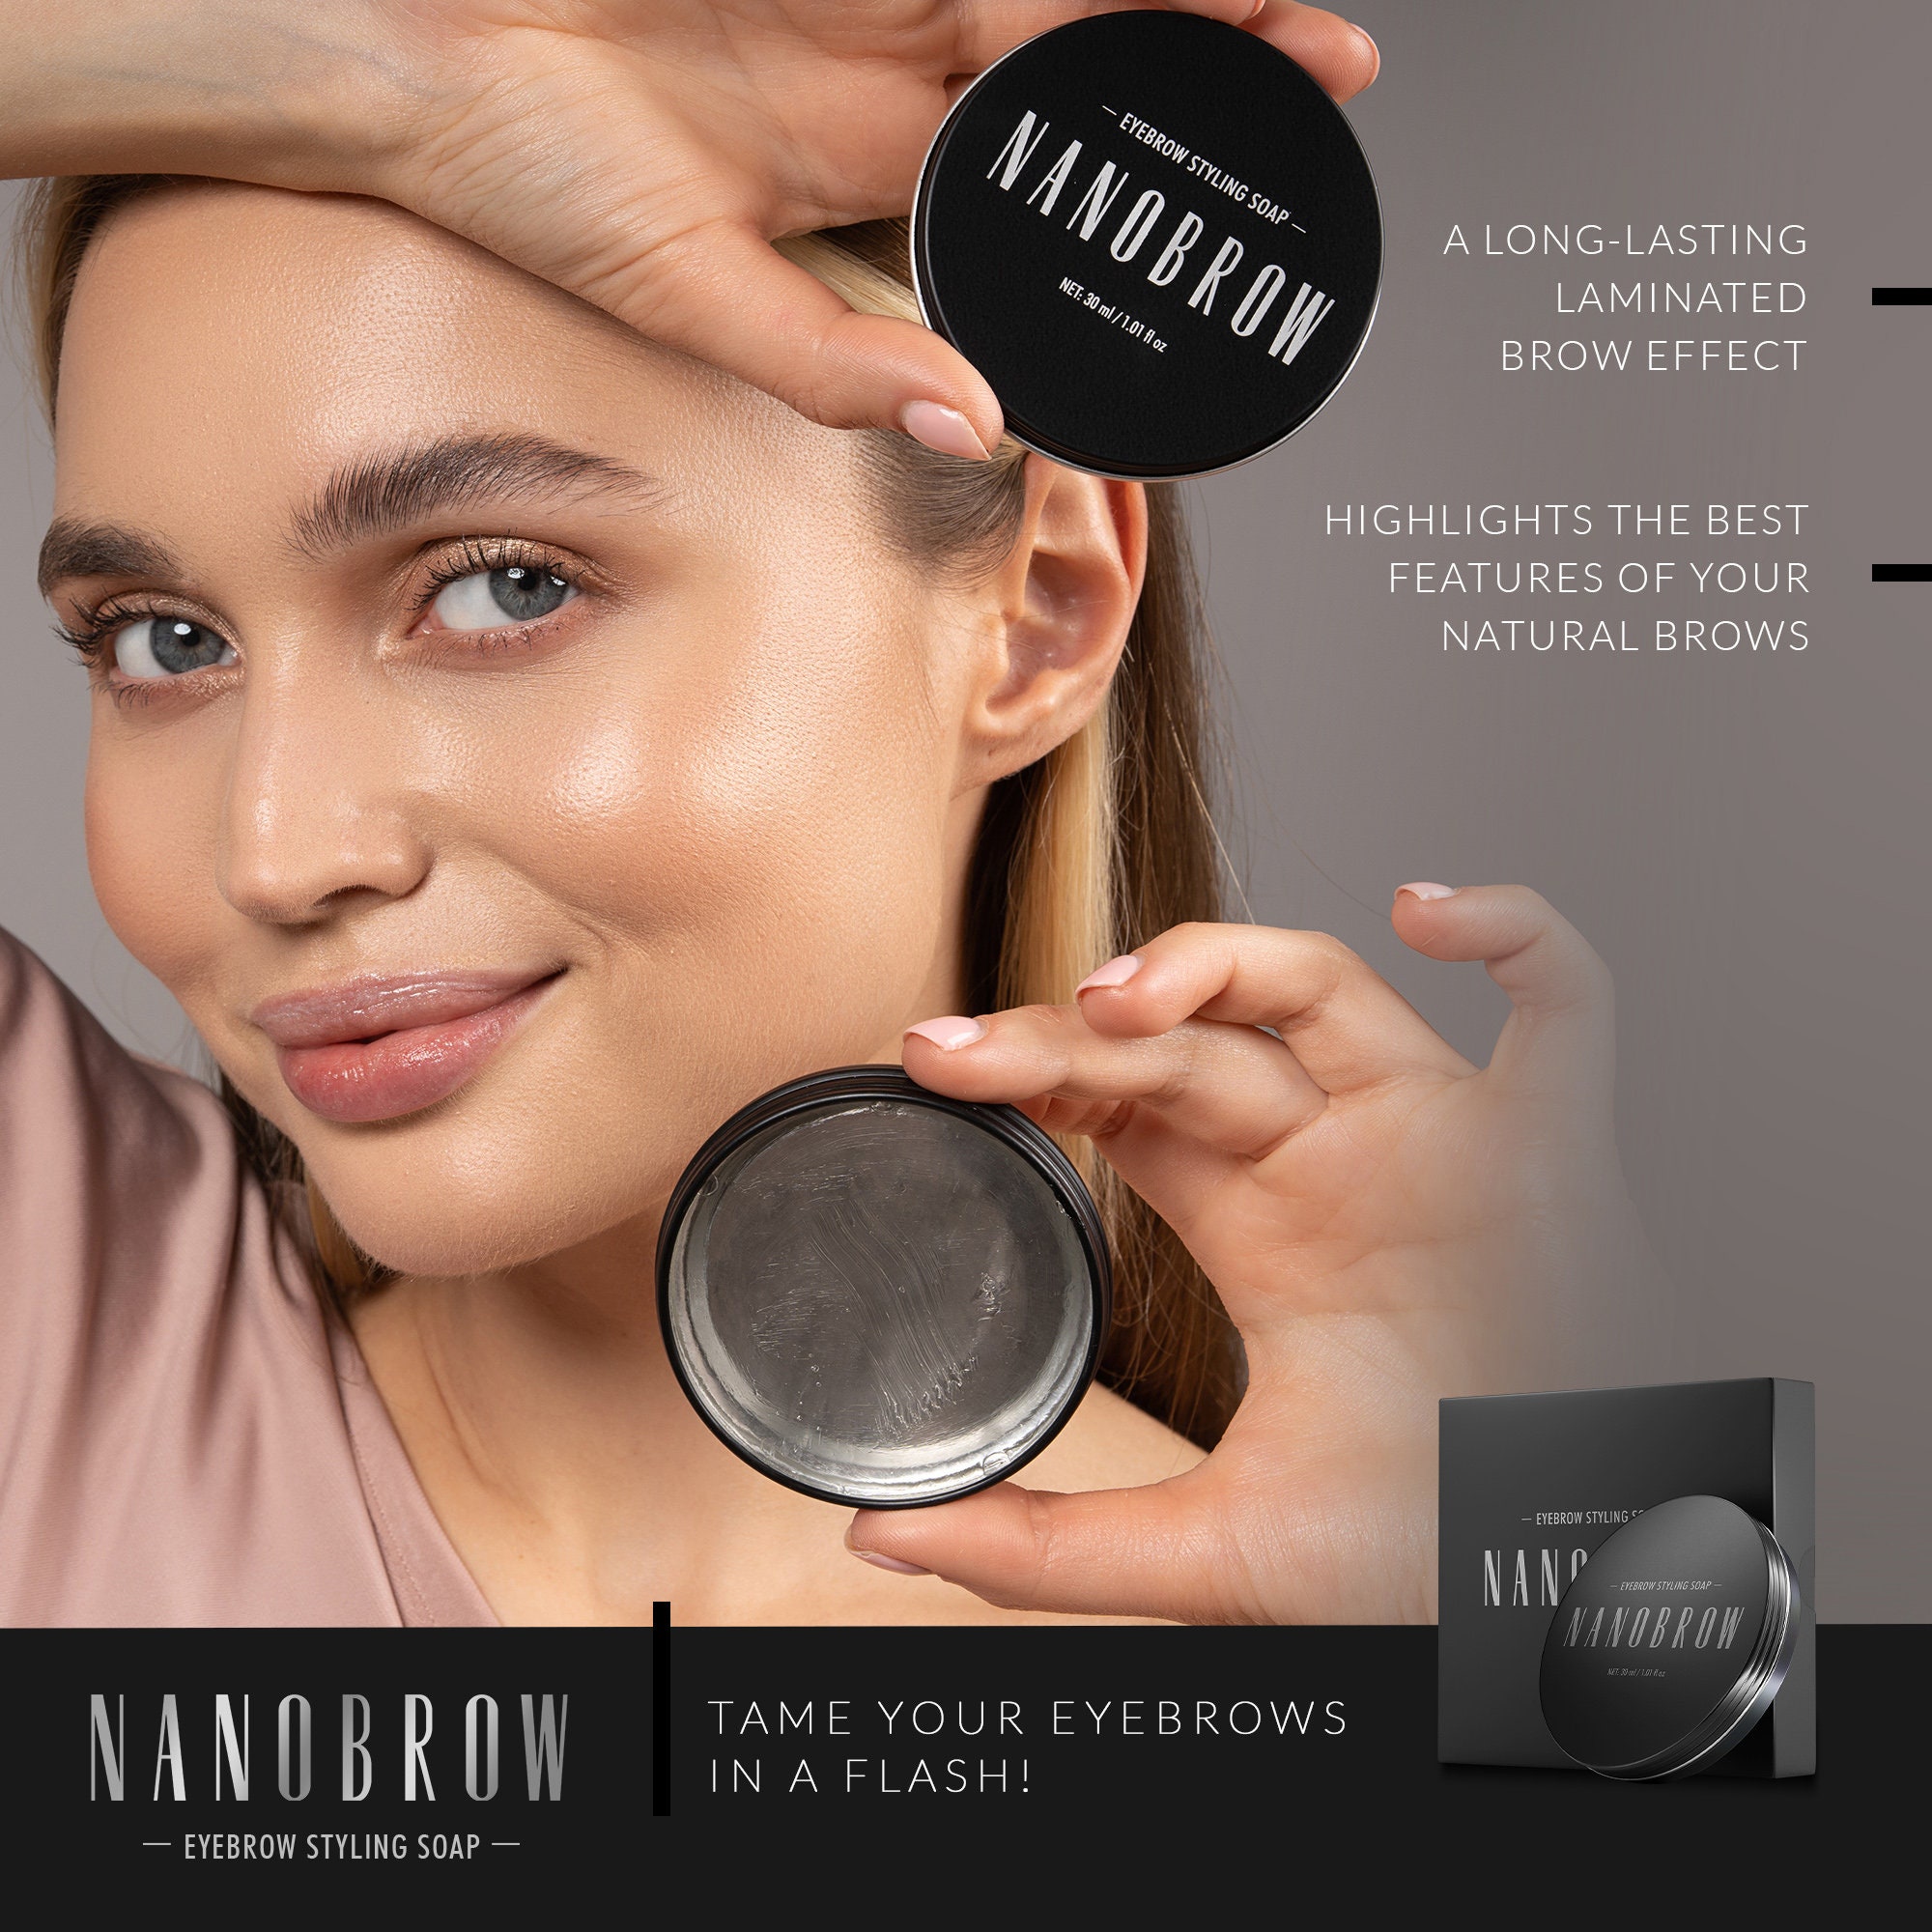 Nanobrow Eyebrow Styling Soap Soap for Brow Styling Brow - Etsy Finland